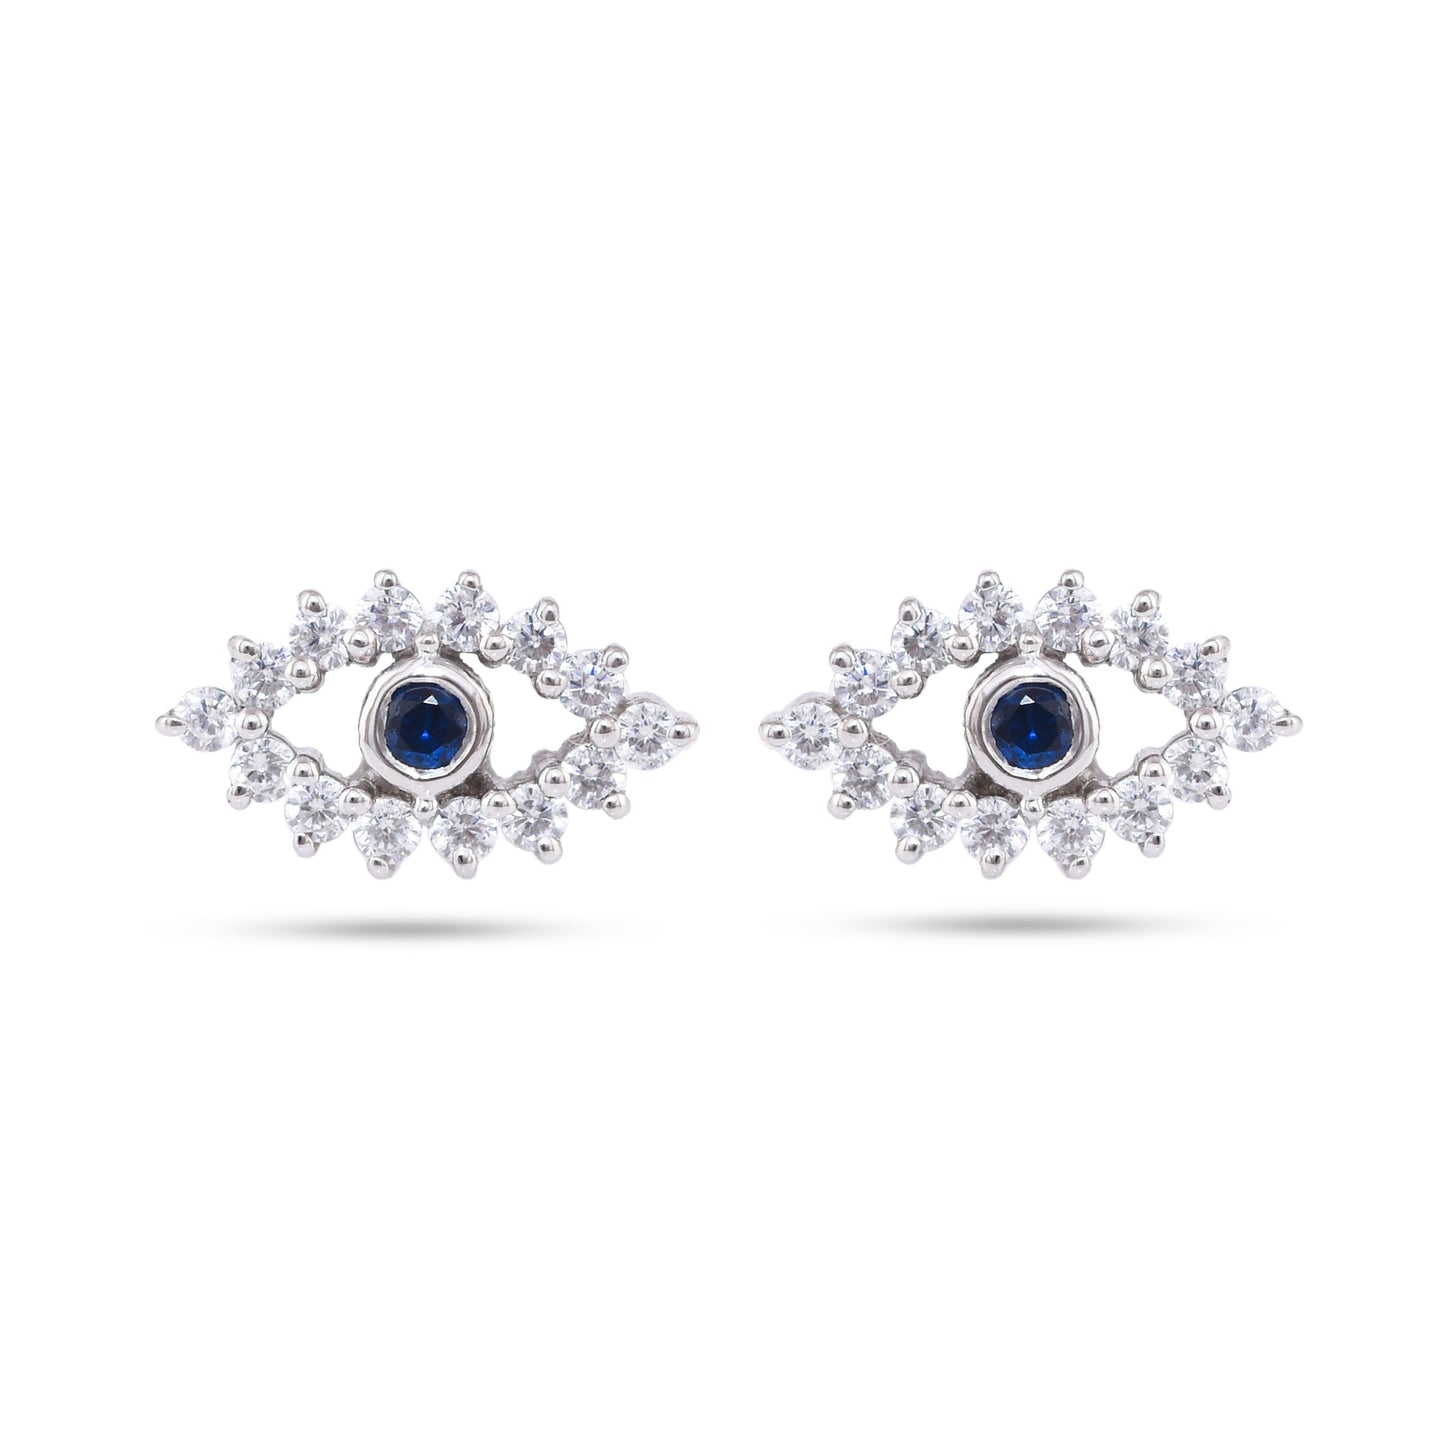 Evil Eye Silver Earrings - From Purl Purl